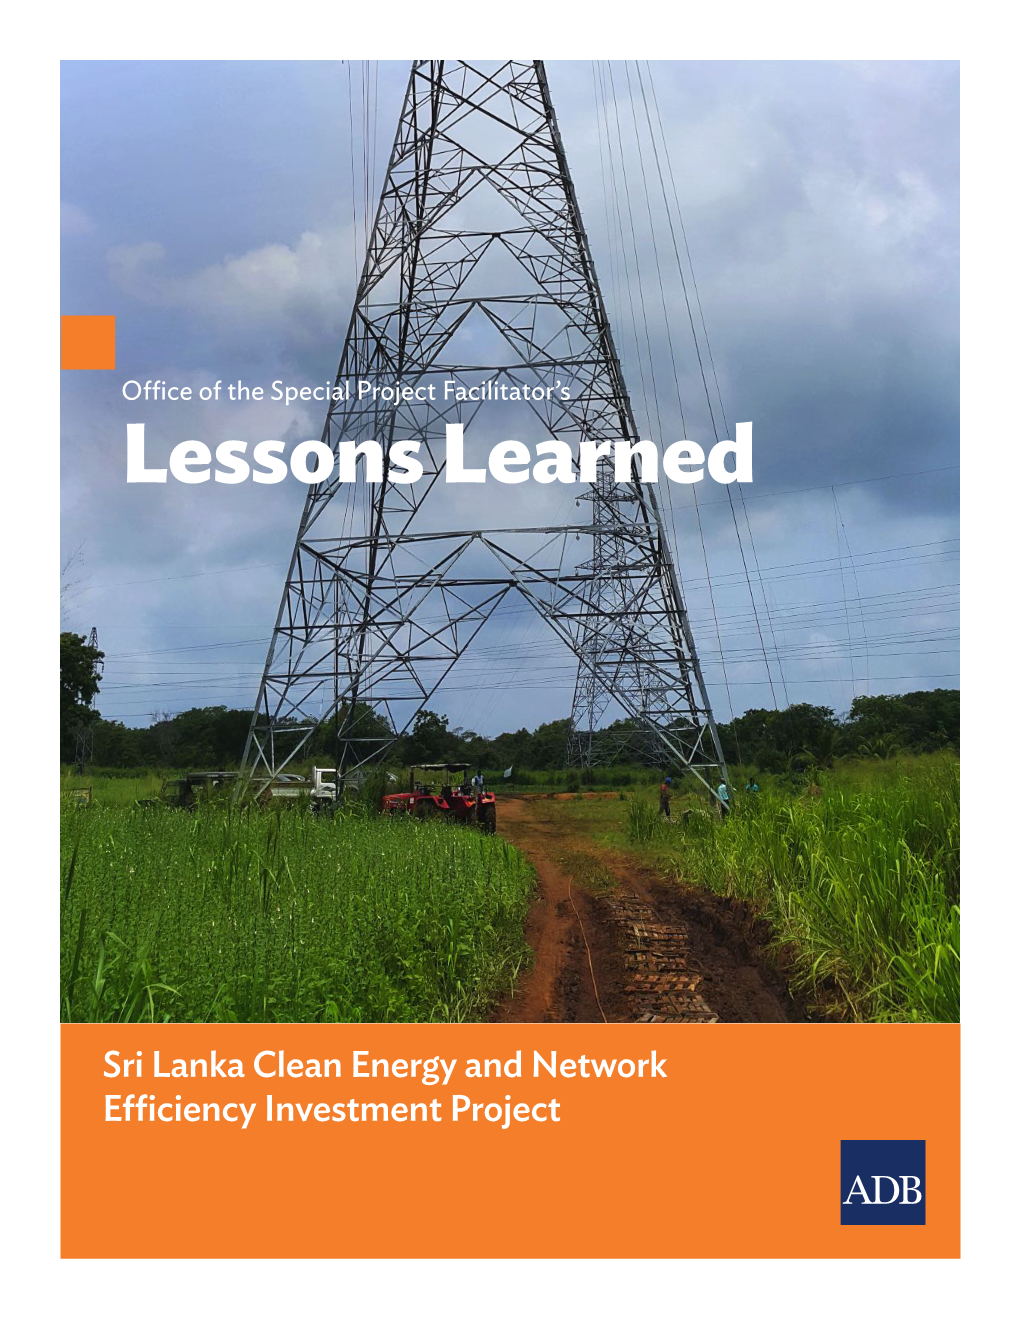 Sri Lanka Clean Energy and Network Efficiency Investment Project